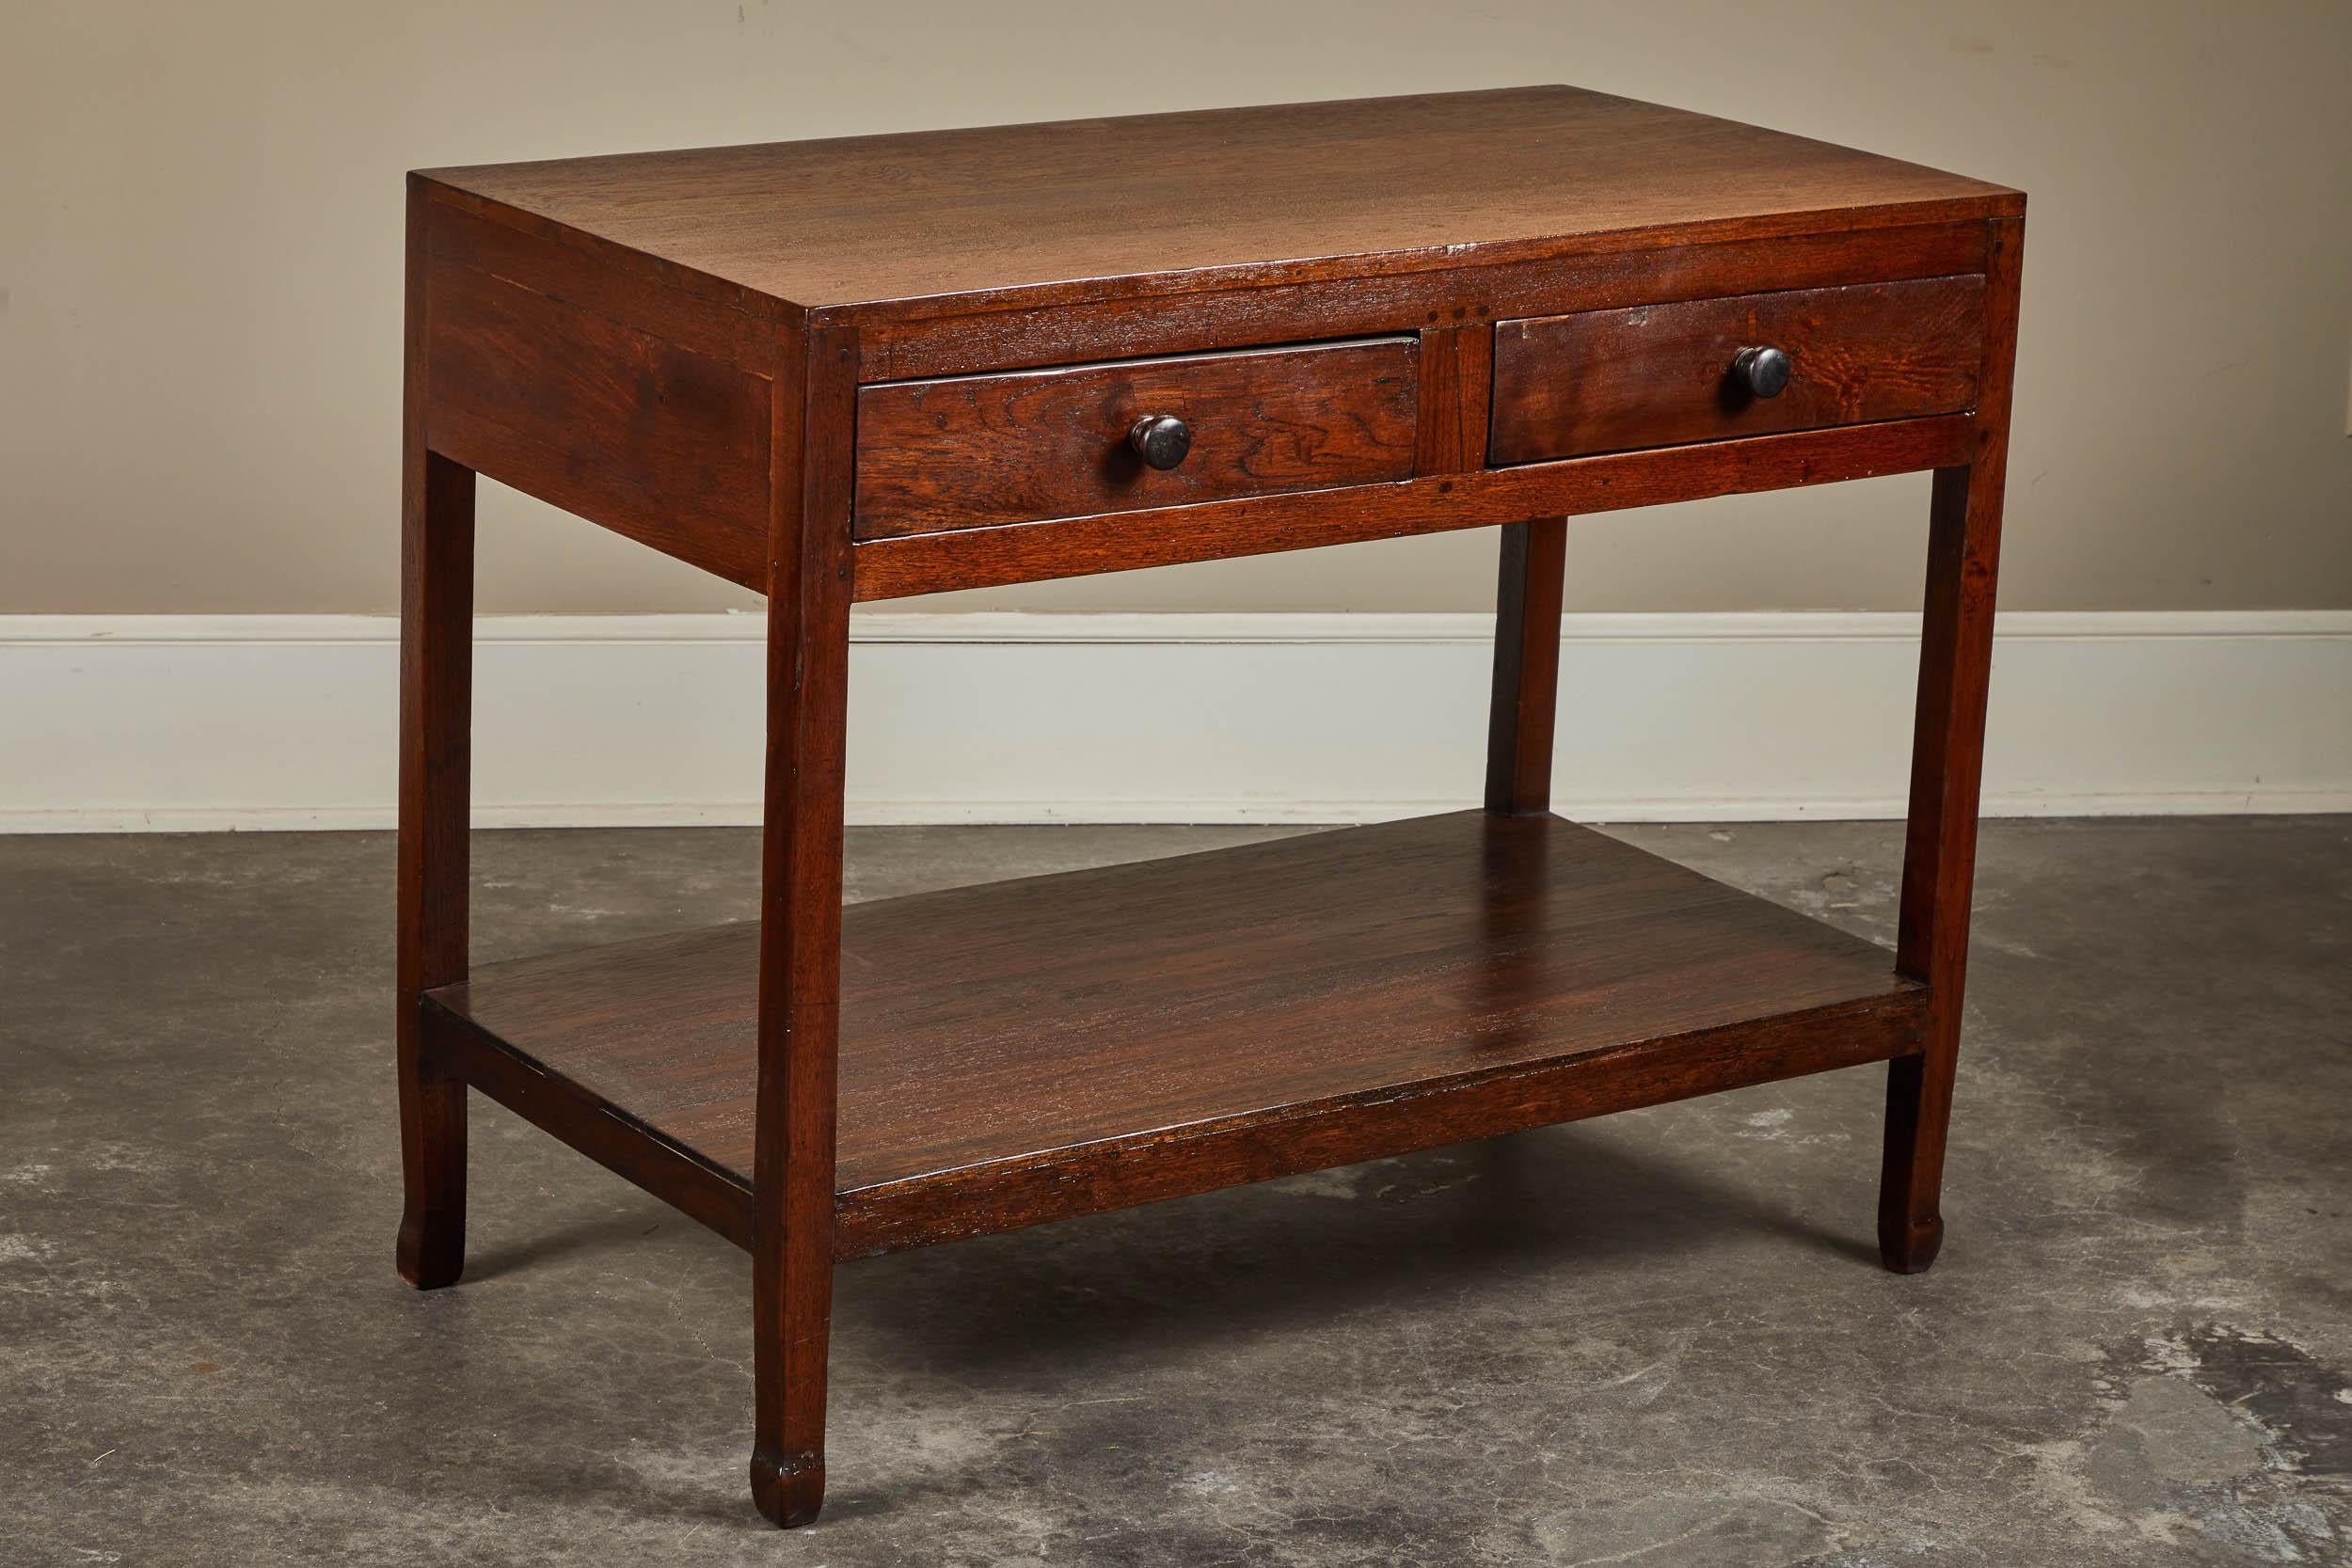 British Colonial 19th Century Colonial Teak Console Table with Drawers